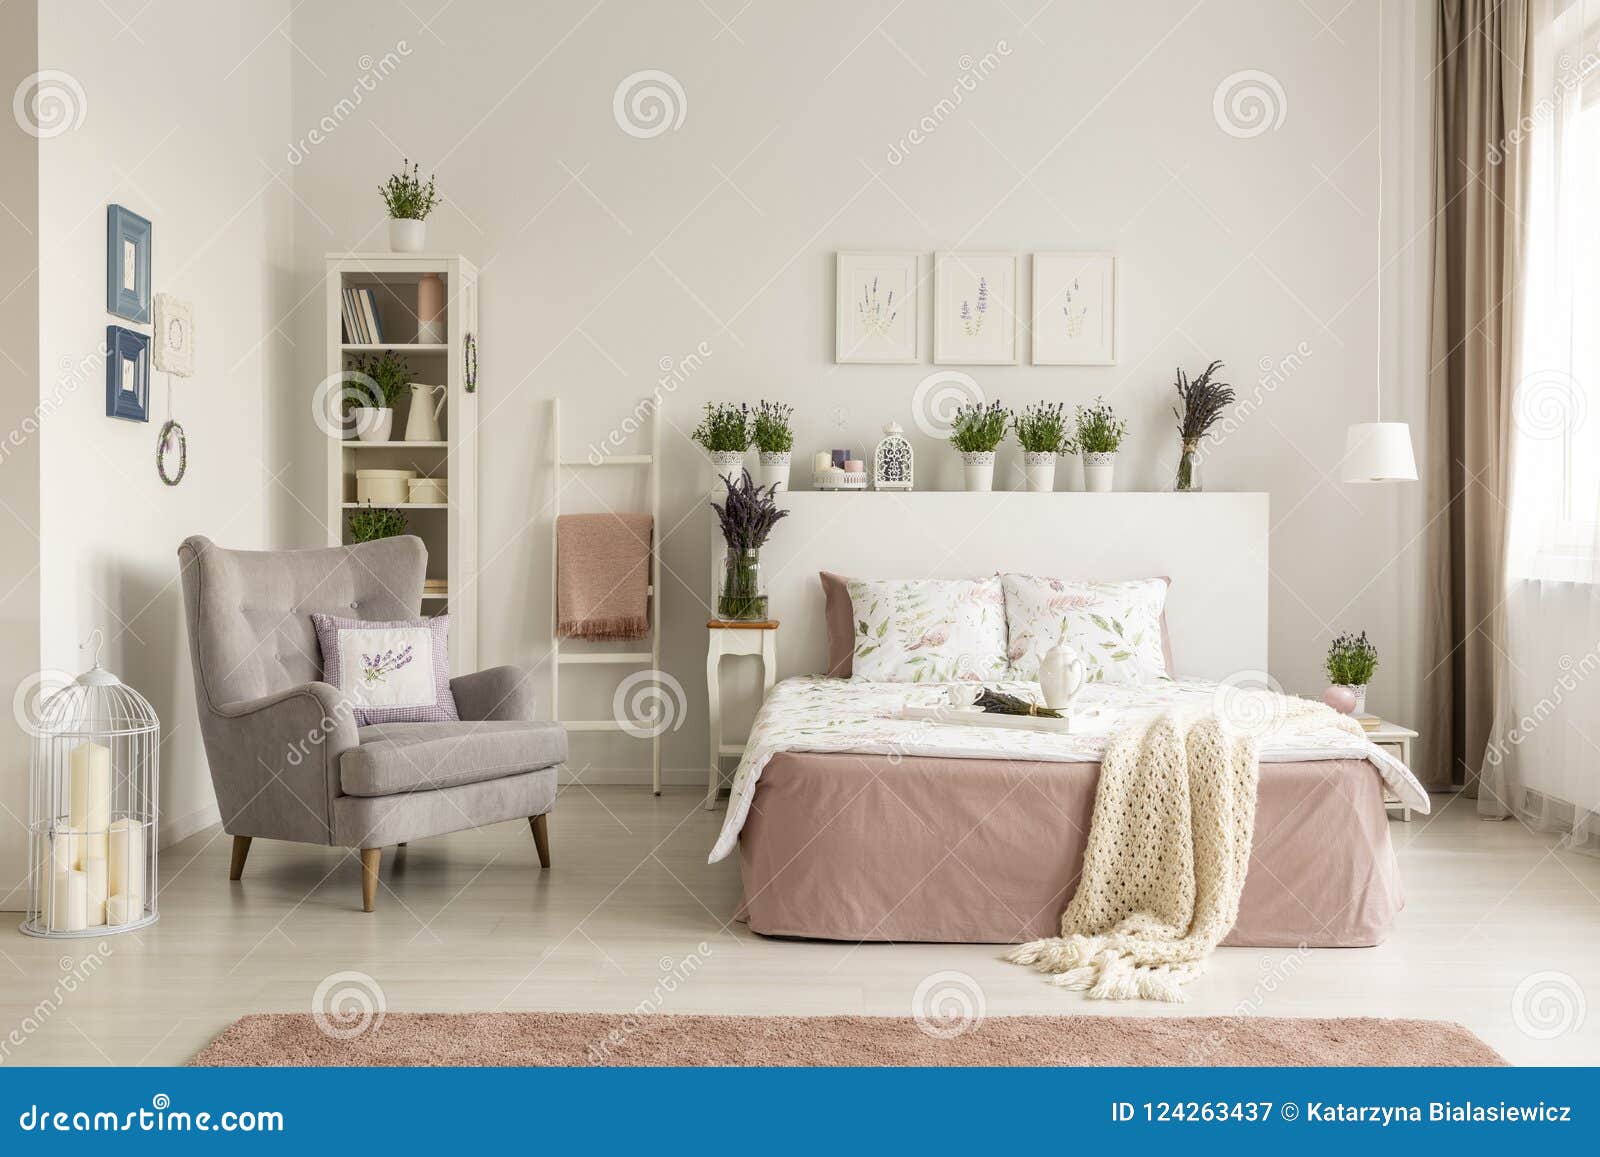 real photo of a feminine bedroom interior with a comfy armchair, bed, plants and shelf